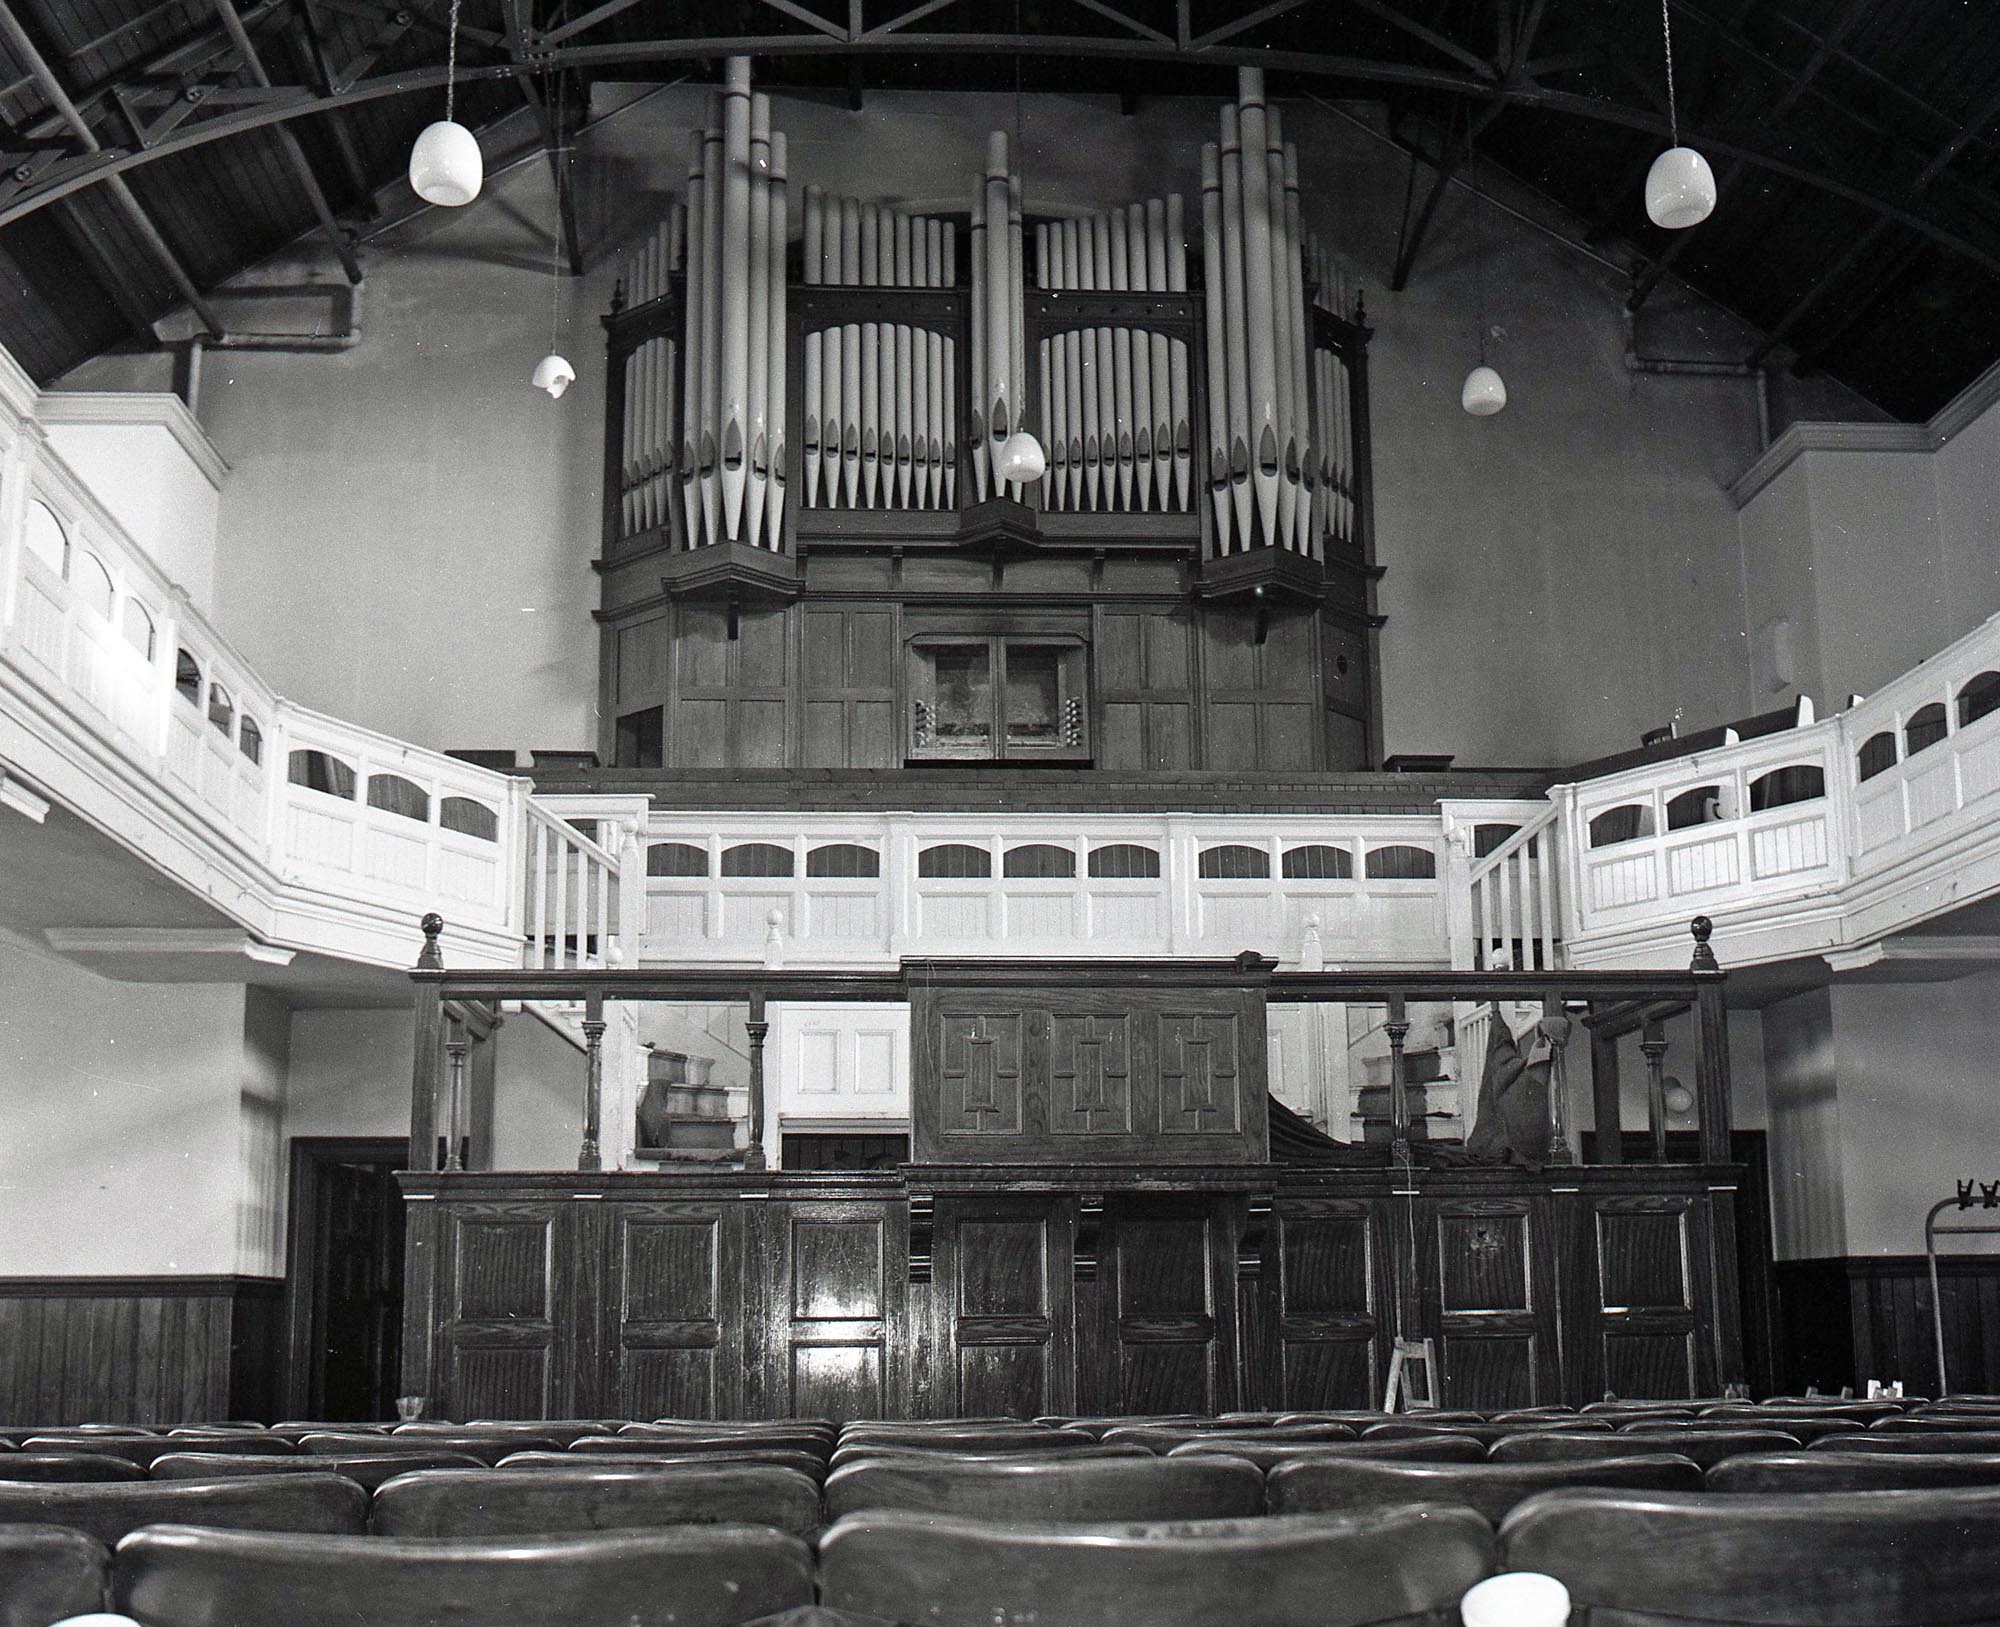 The church organ before it was decommissioned -